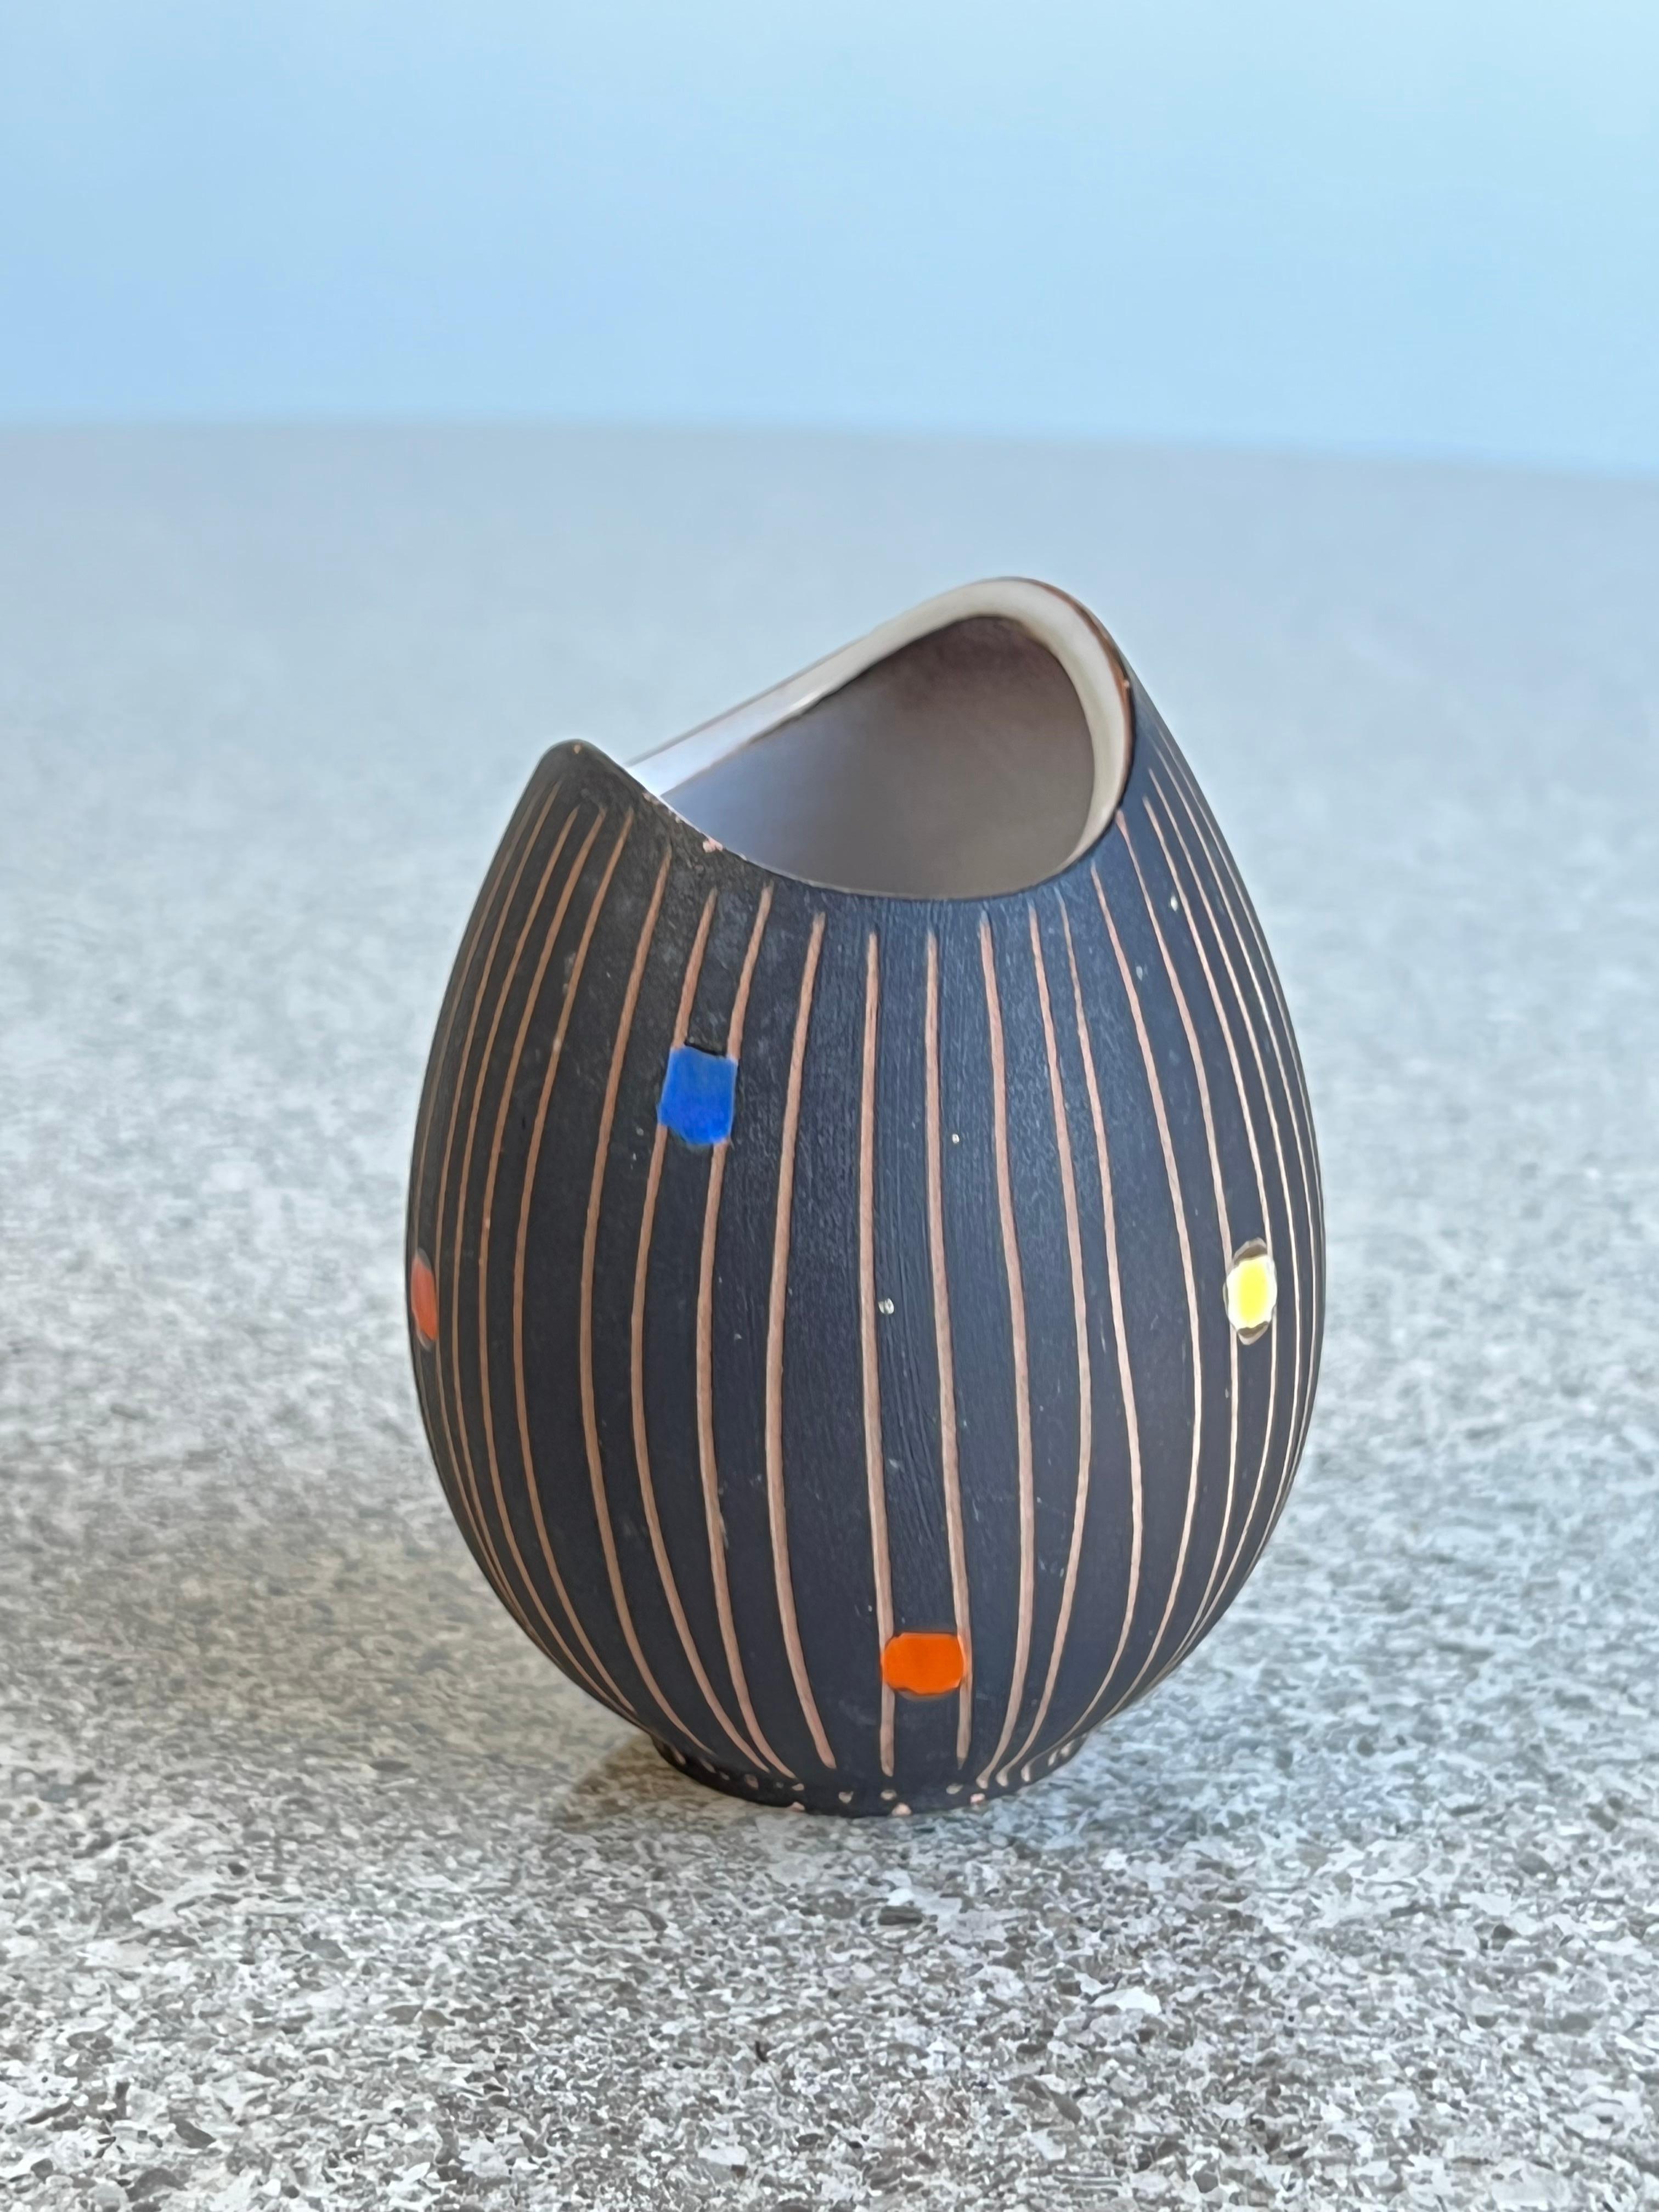 Italian 1960s Hand Painted ceramic vase.
Signed ceramic by AT serial number 3969.
Hand spited stripes and yellowed and blue decorations.
 